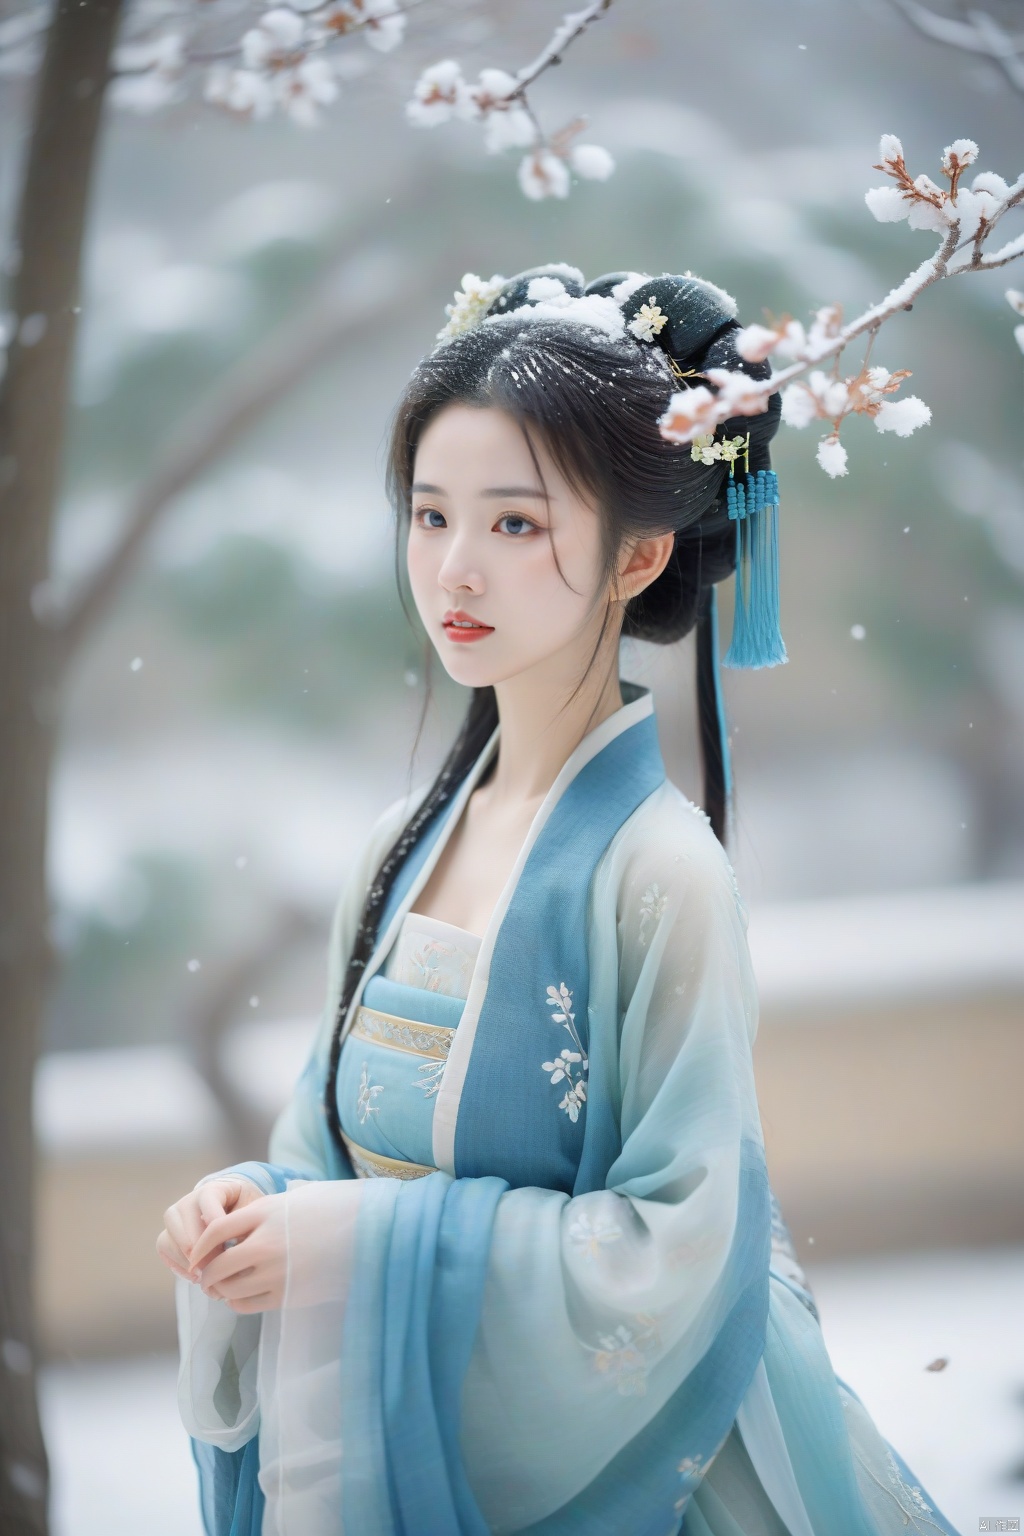 hanfu dress,a beautiful girl is standing,The Han costume of the Song Dynasty, the whole body,Flower basket,beautiful face,be affectionate,long eyelashes,high nose,Song Dynasty Hanfu, Winter, snowy days, snowfall, snow on tree tops, snow on the ground,gentle depth of field and soft bokeh,Capture the image as if it were taken on an 35mm film for added charm, looking at viewer,35mm photograph,The main color tone of the screen is blue, with a film style (aperture: f/1.4, ISO-100, focal length: 35mm), Full body, denim lens,film, bokeh, professional, 4k, highly detailed, MAJICMIX STYLE